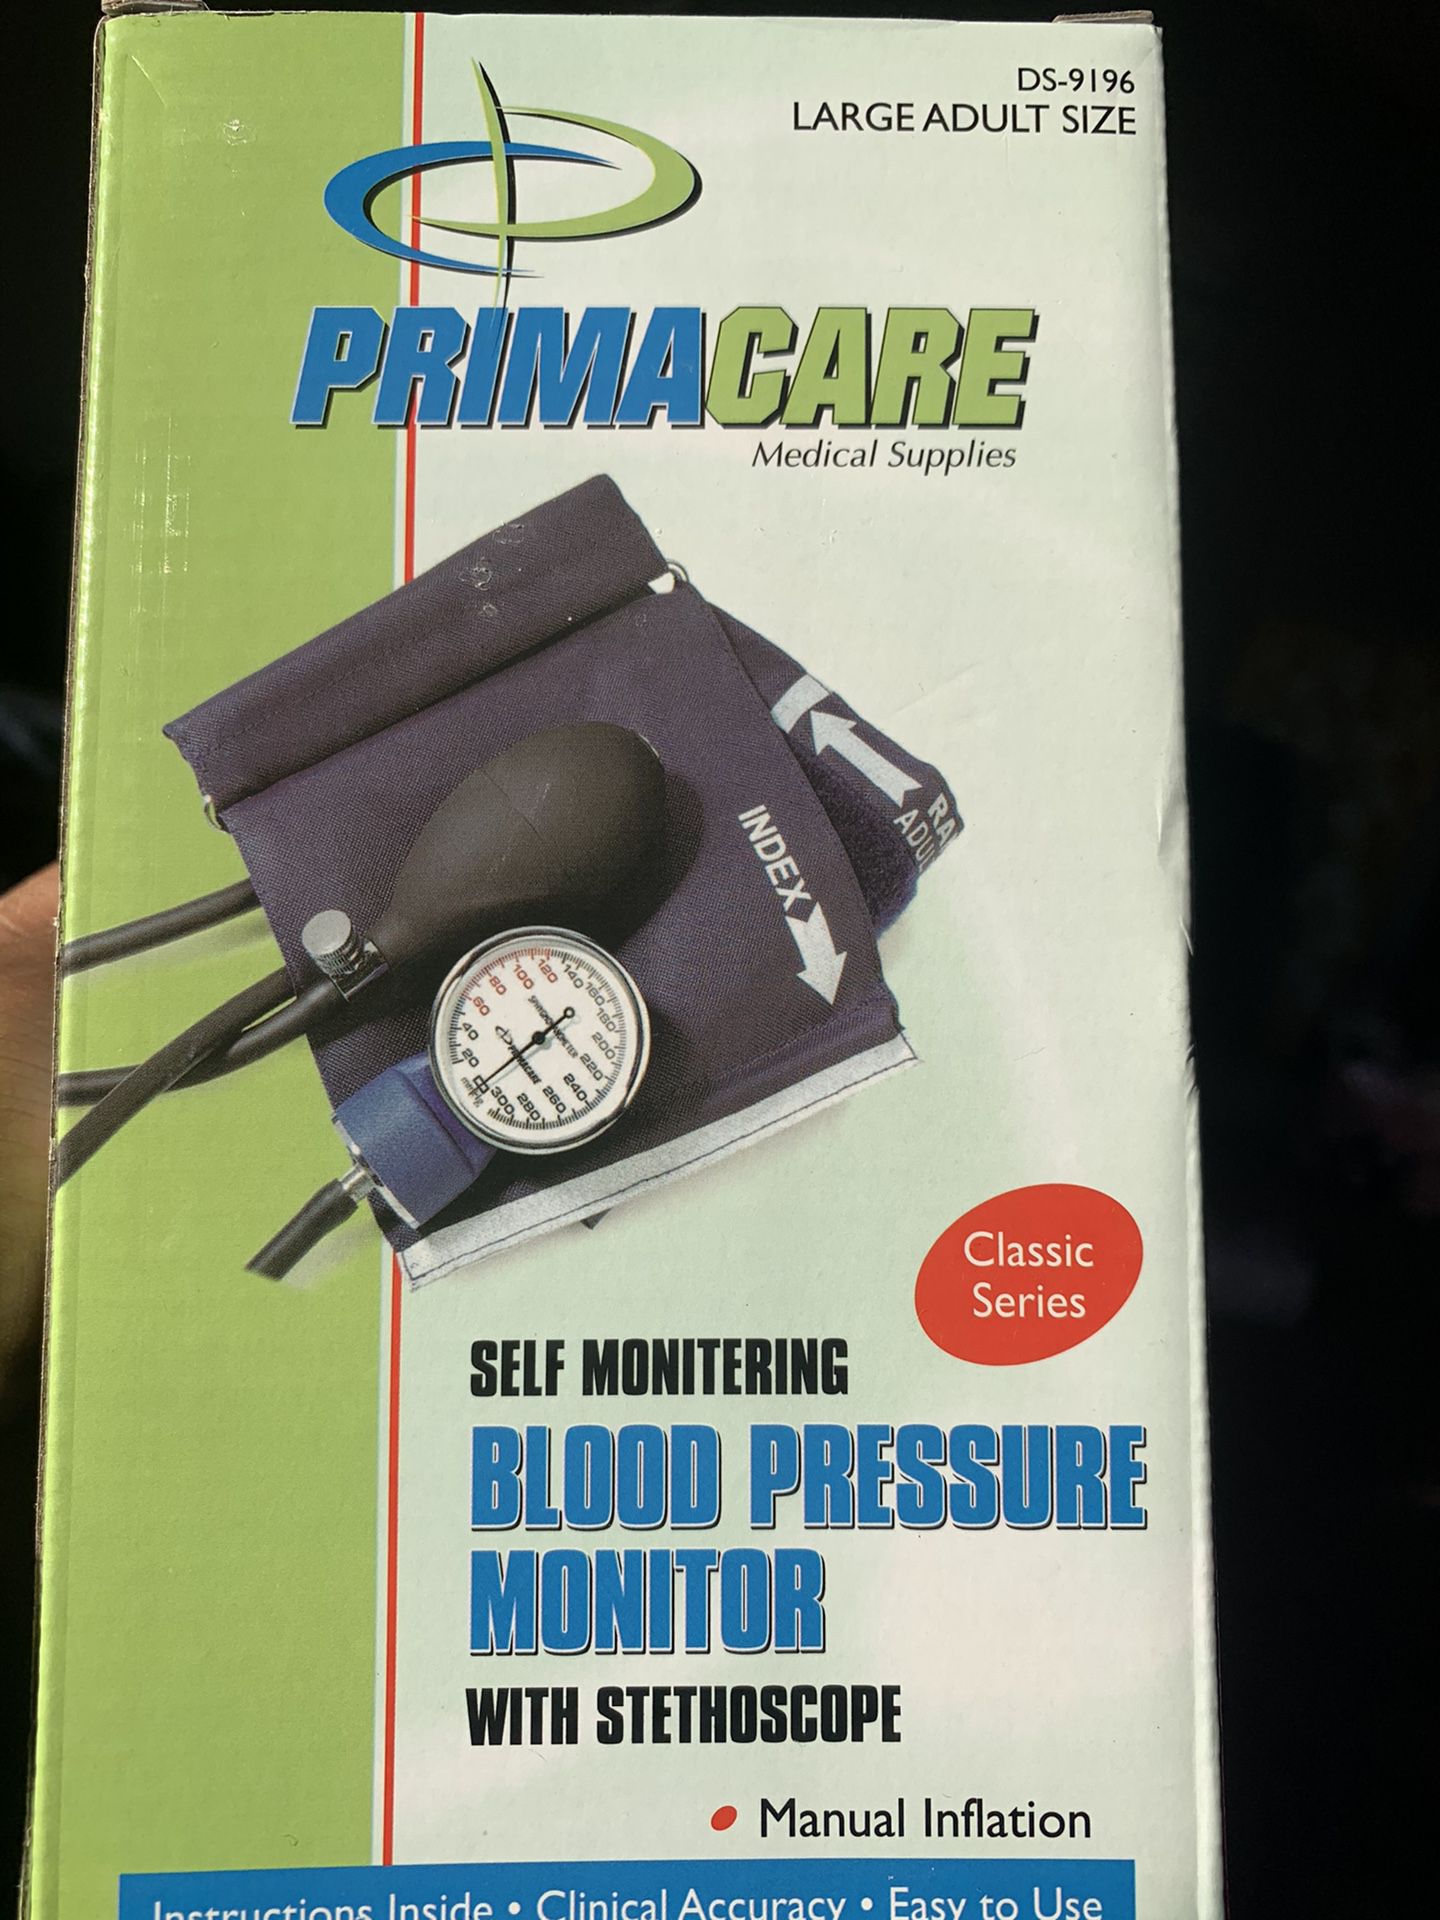 PRIMACARE SELF MONITERING BLOOD PRESSURE MONITOR WITH STETHOSCOPE